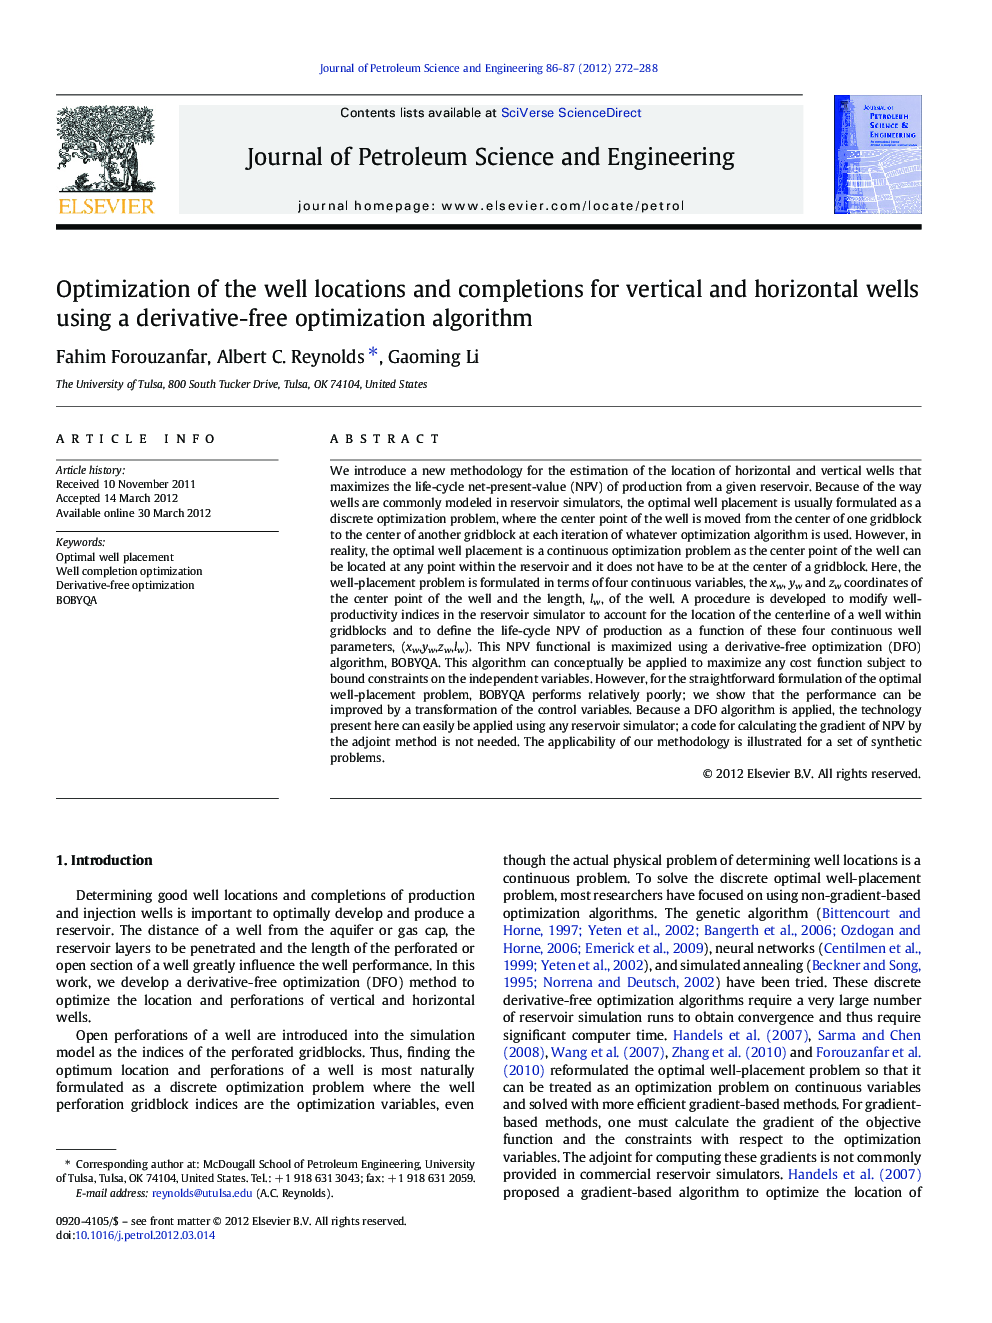 Optimization of the well locations and completions for vertical and horizontal wells using a derivative-free optimization algorithm